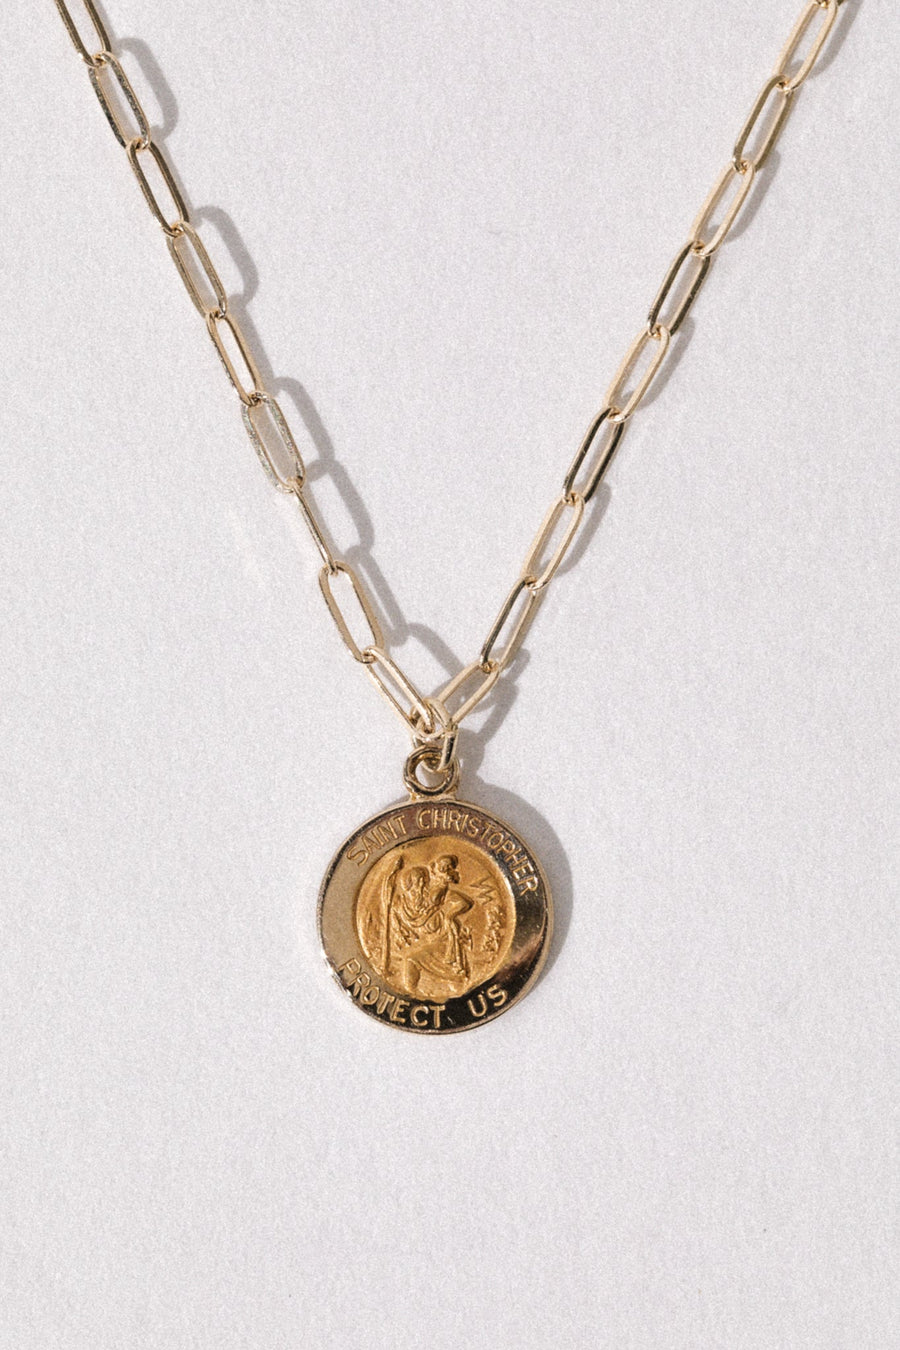 Stuller Jewelry Gold / 16 Inches 14kt Saint Christopher Necklace